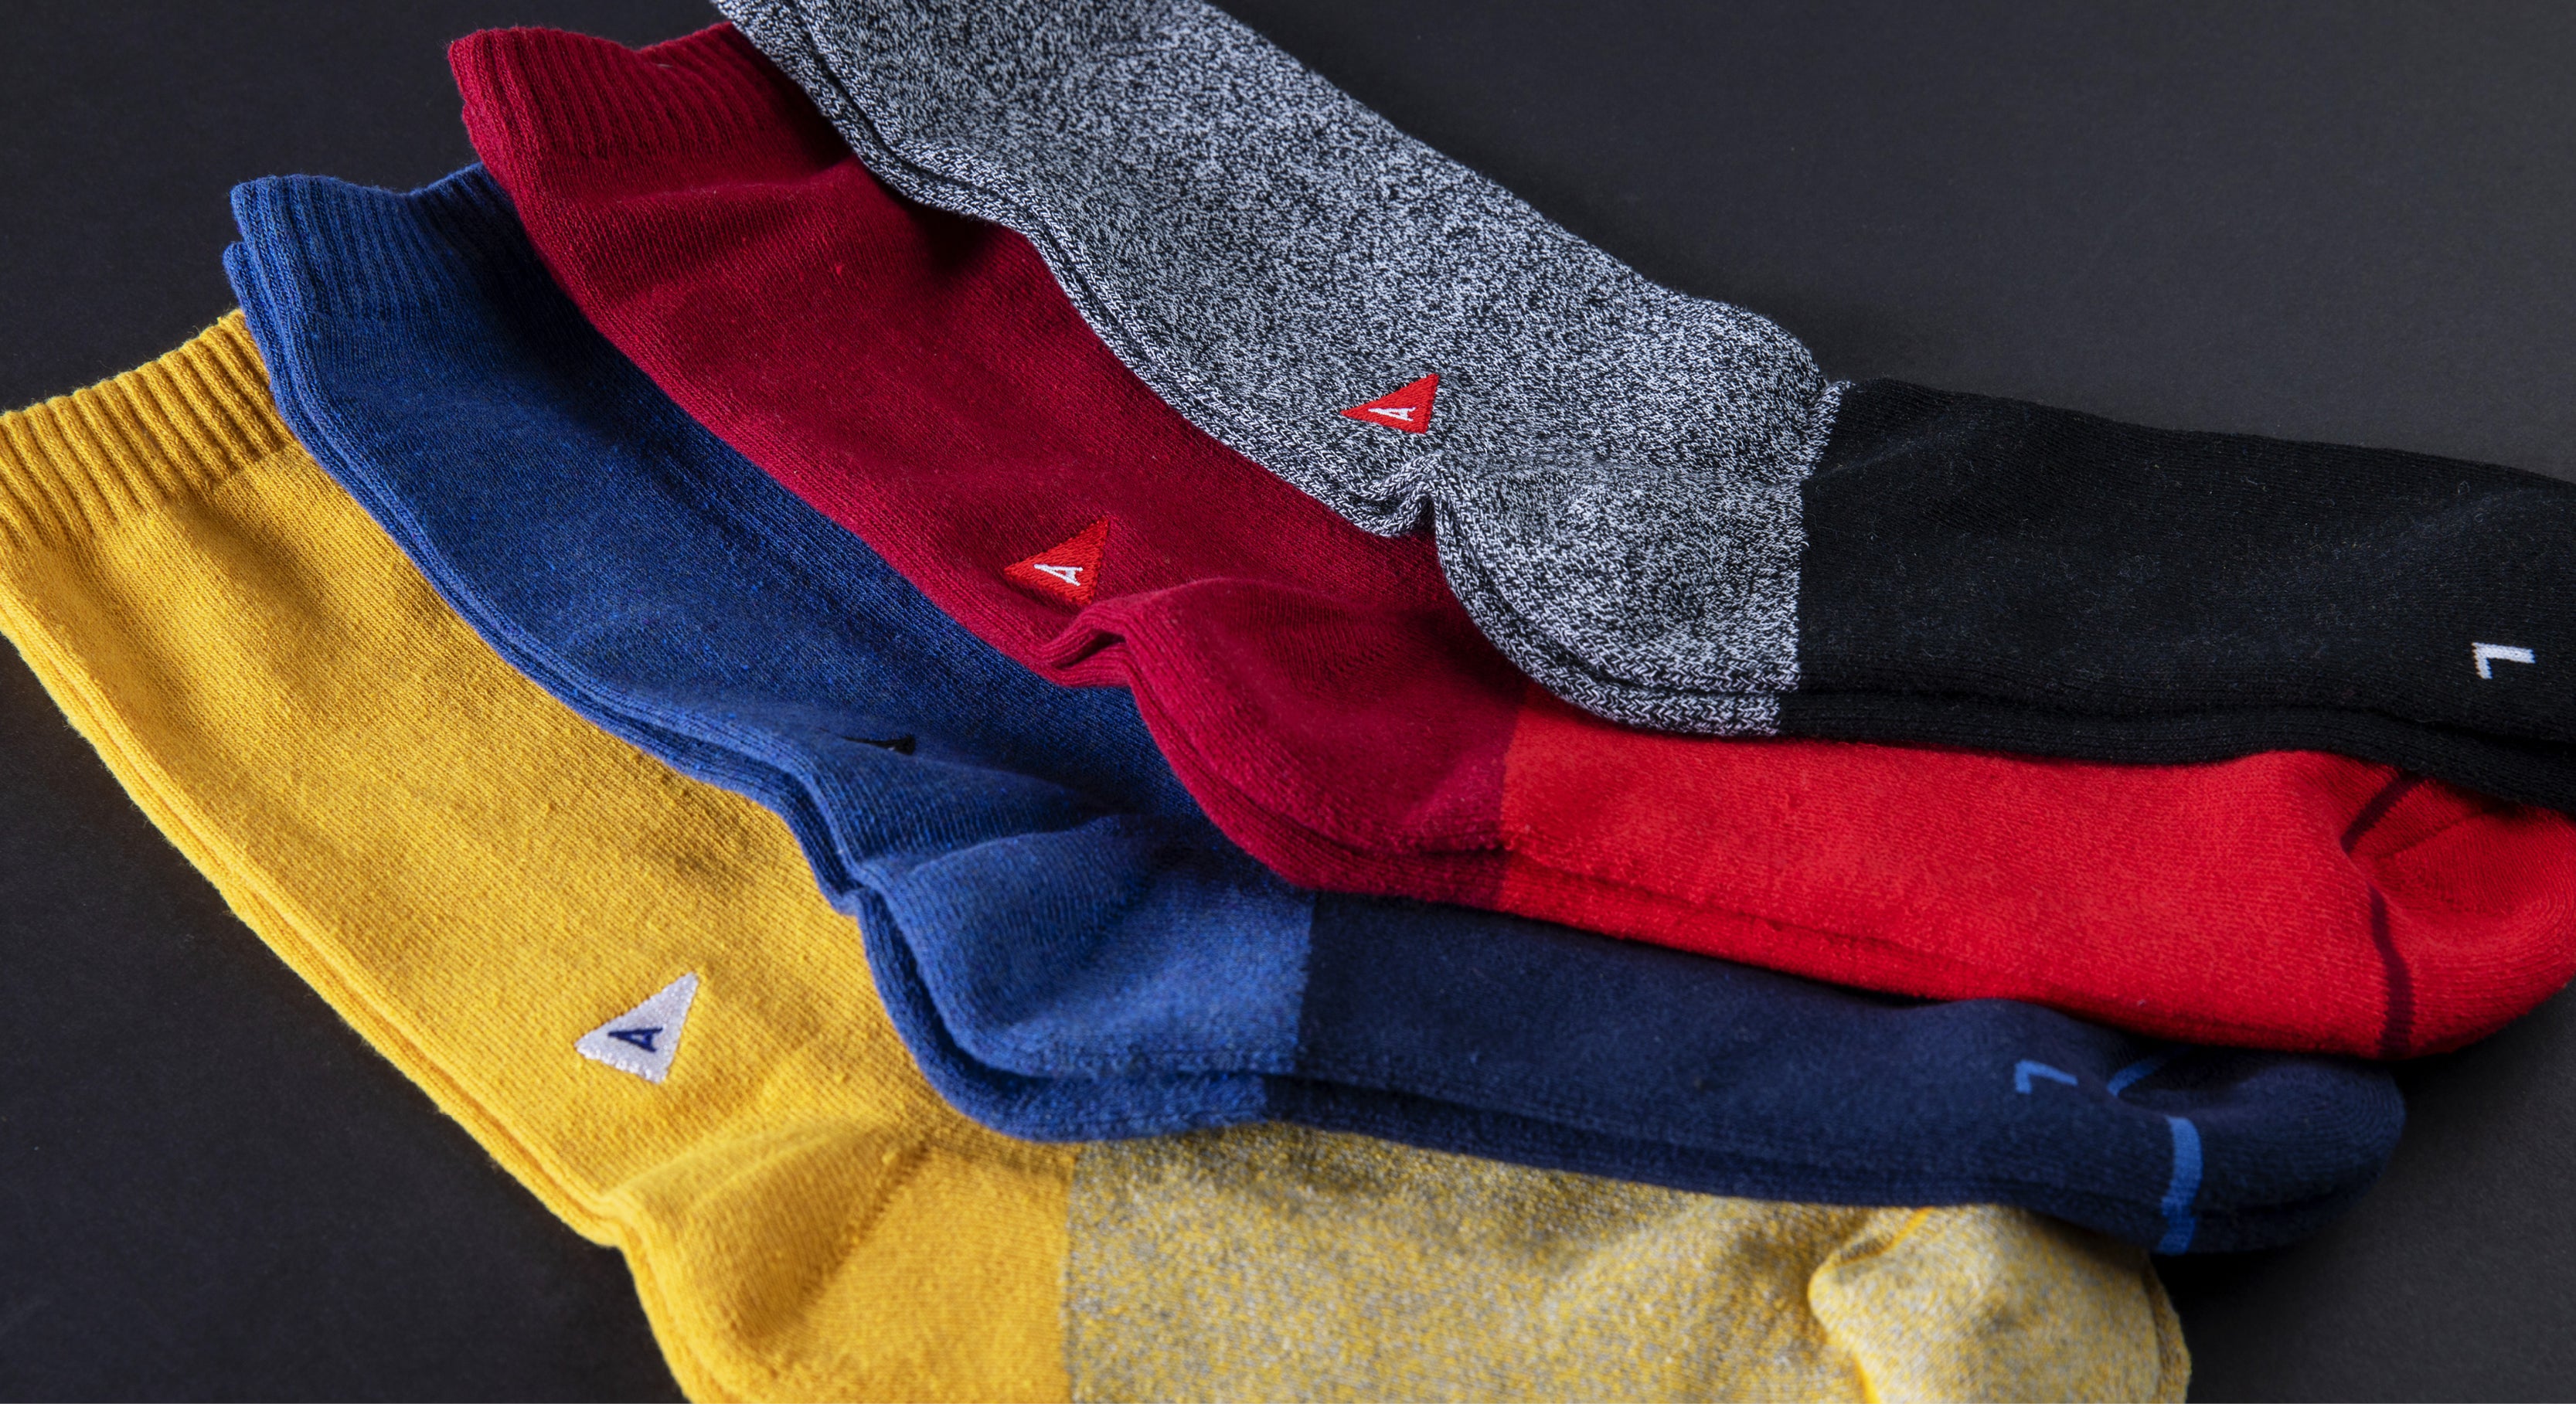 Arvin Goods Is Turning Old Apparel Scraps Into Cool, Comfy Socks